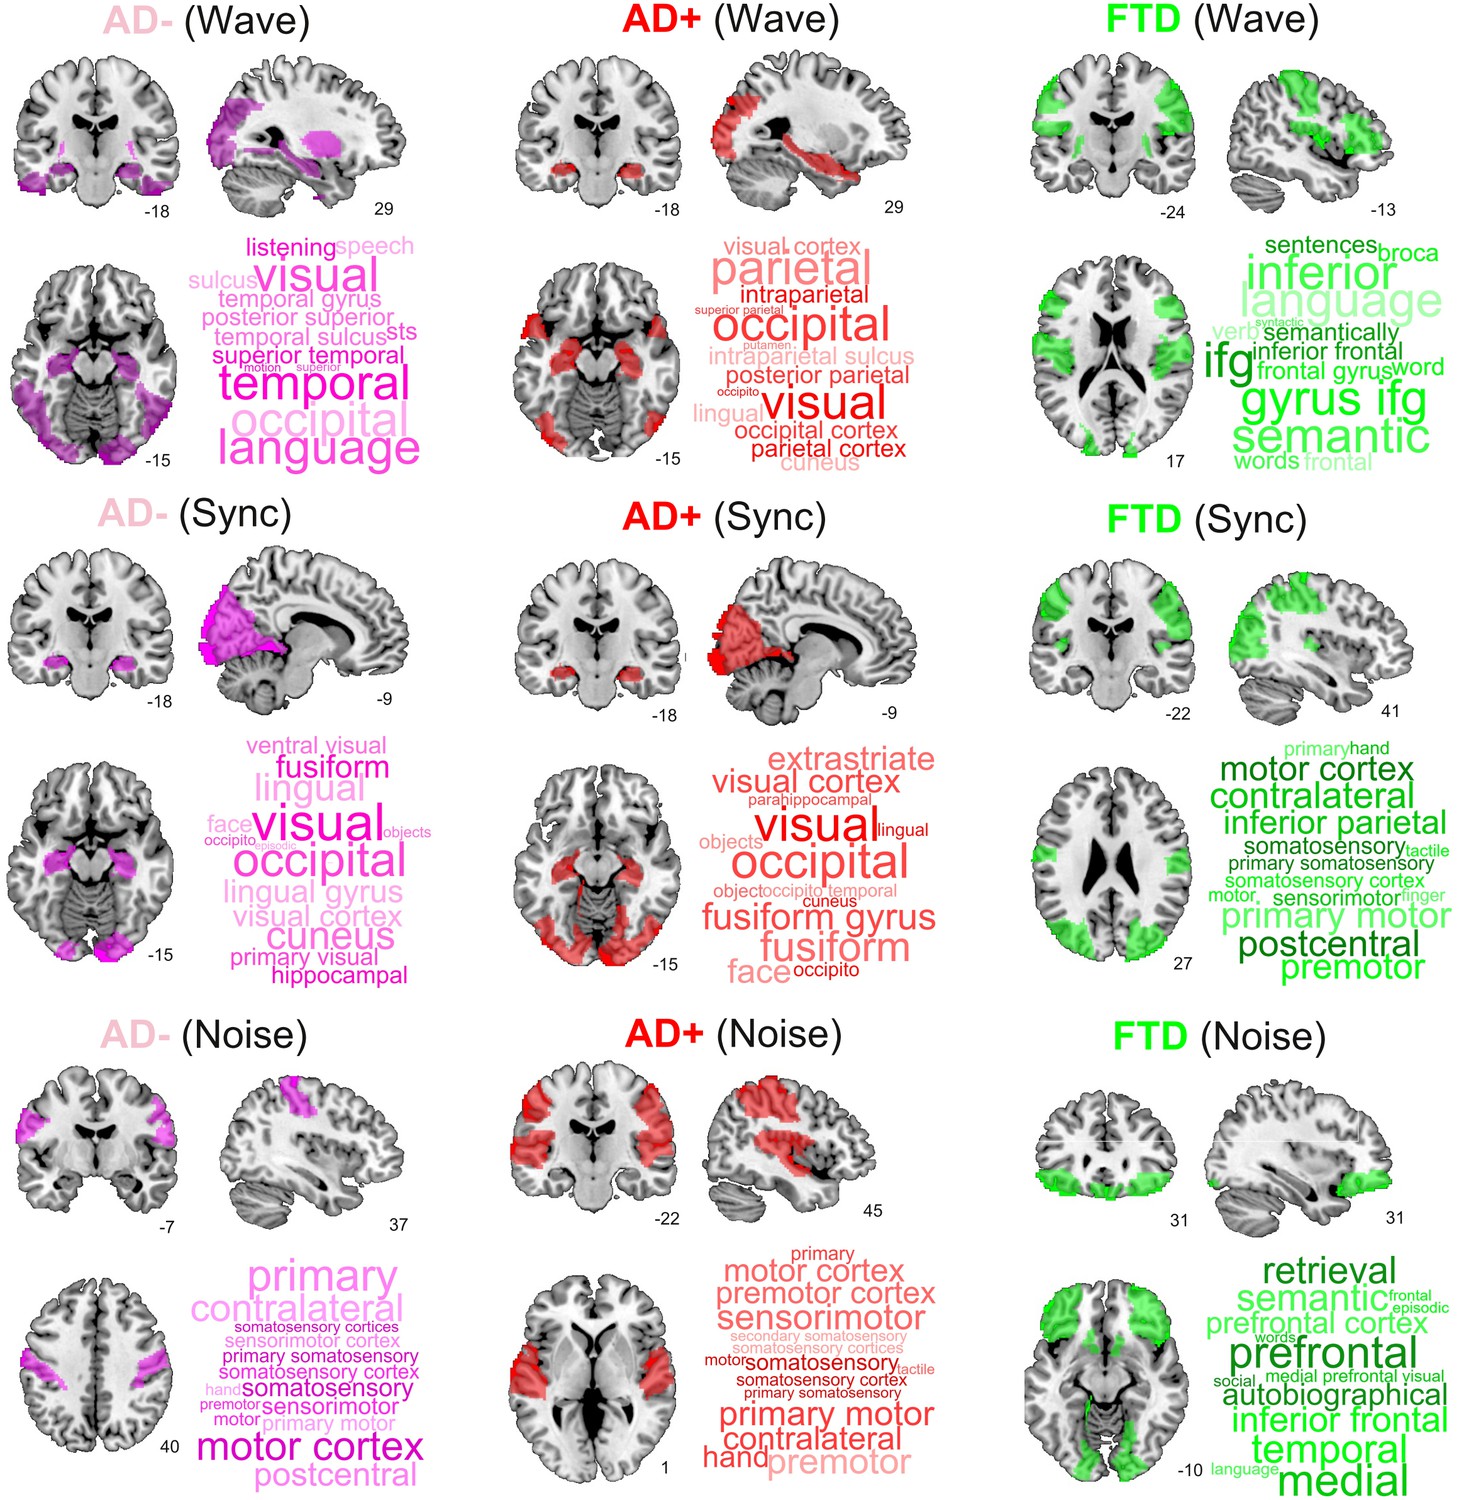 Improving the study of brain-behavior relationships by revisiting basic  assumptions: Trends in Cognitive Sciences